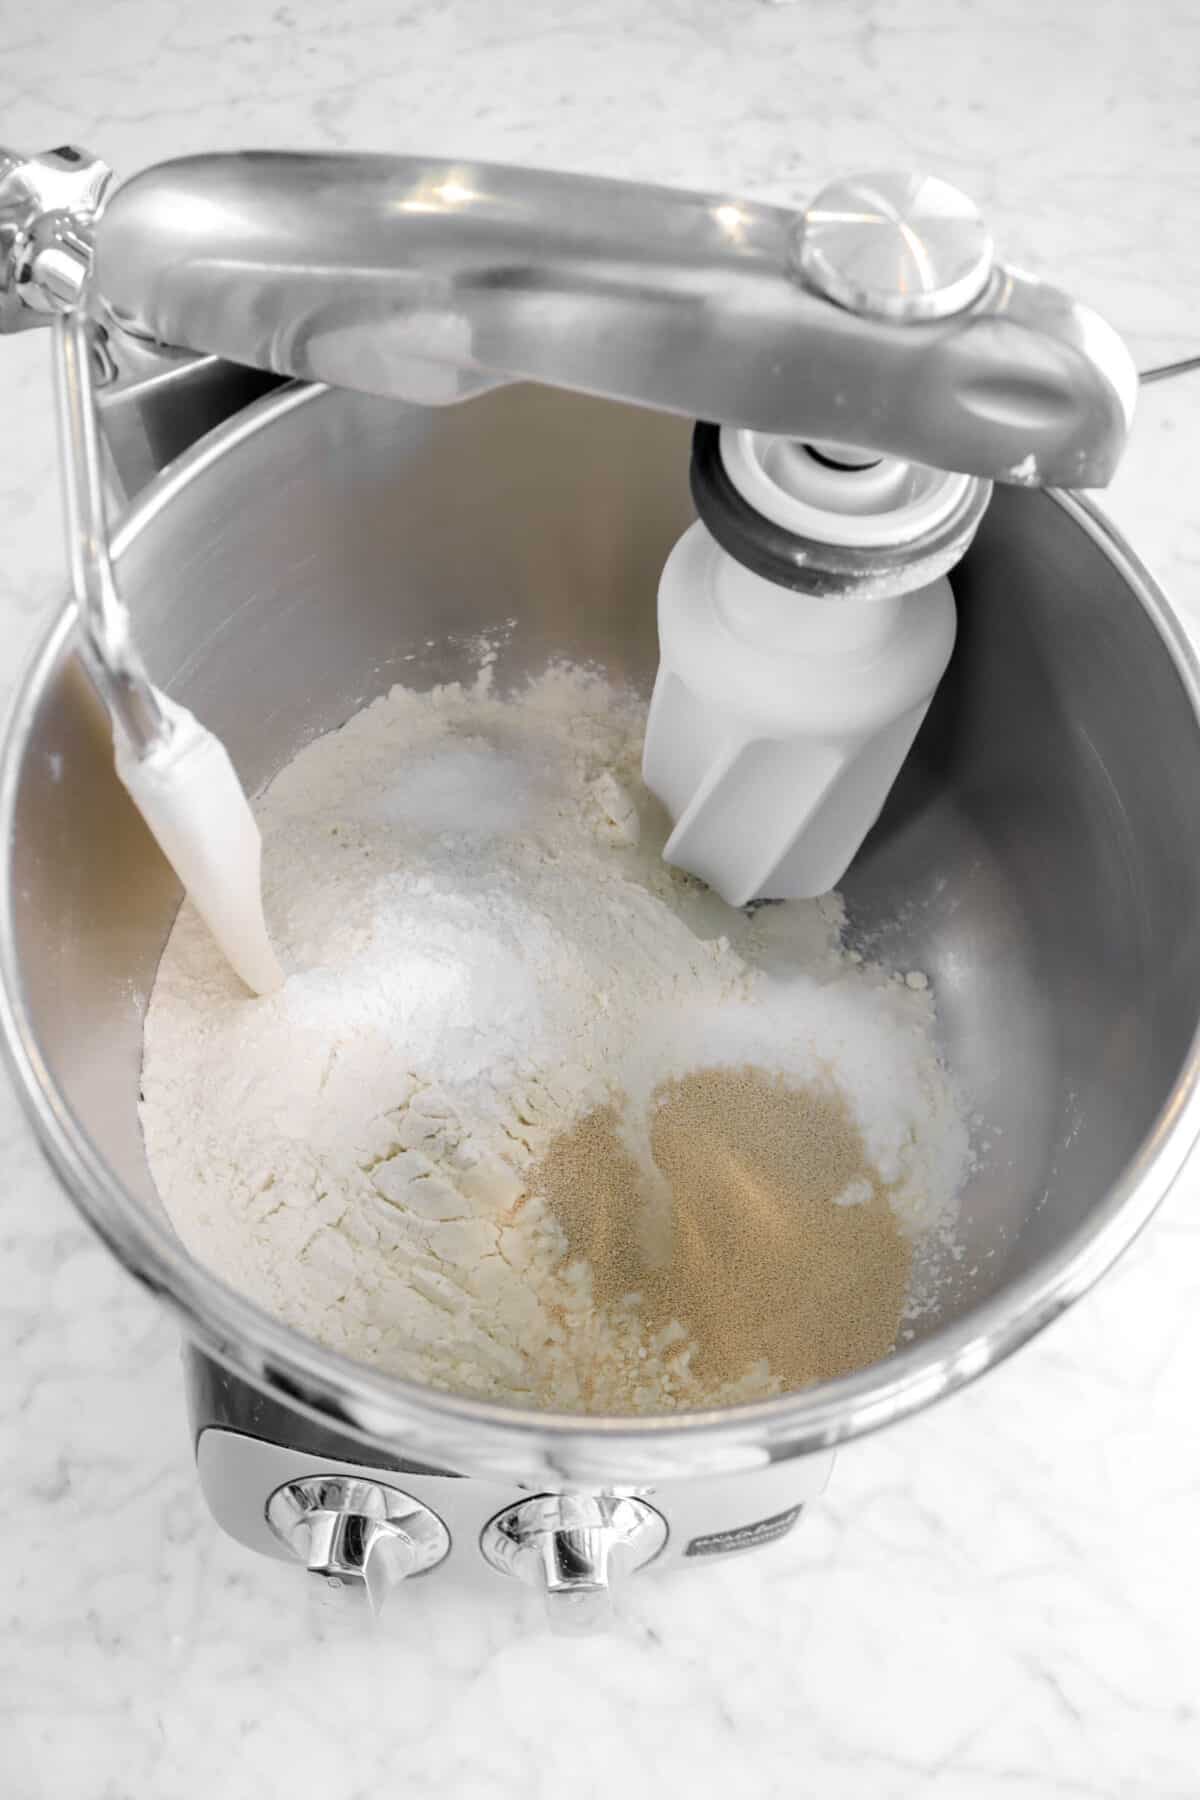 flour, yeast, and salt in mixer bowl